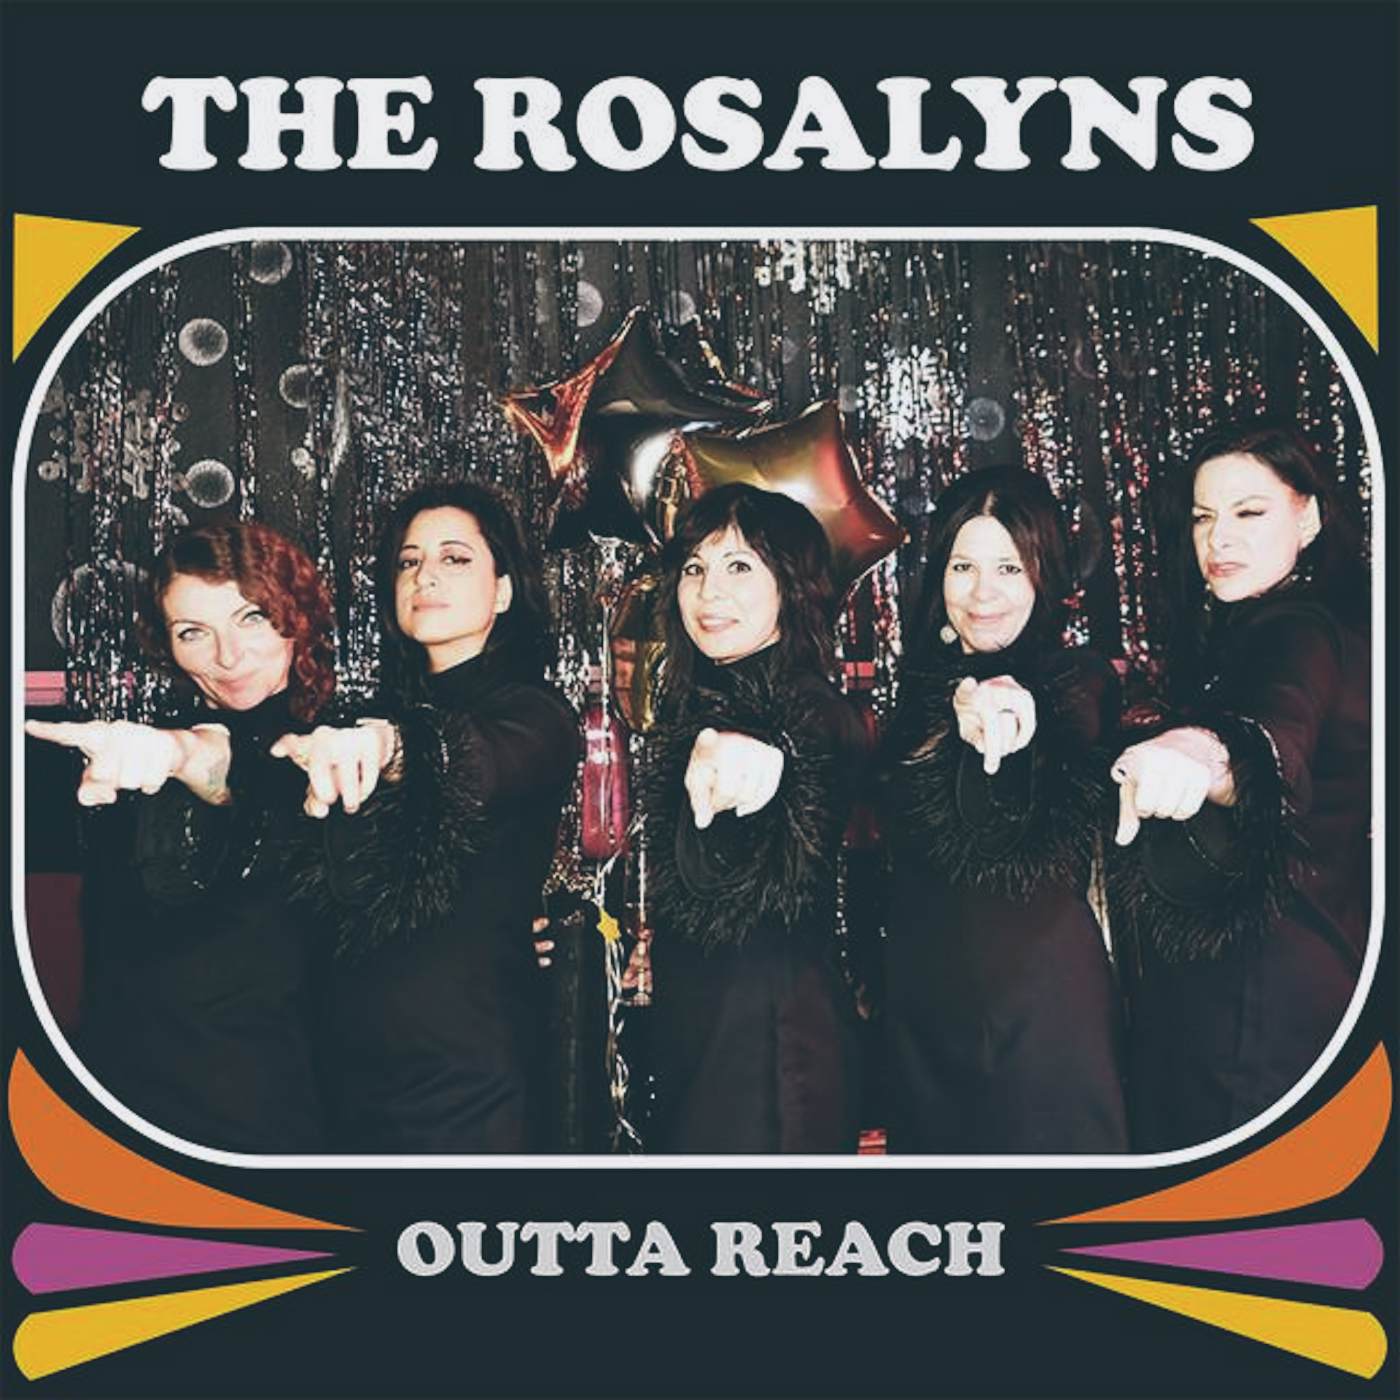 The Rosalyns